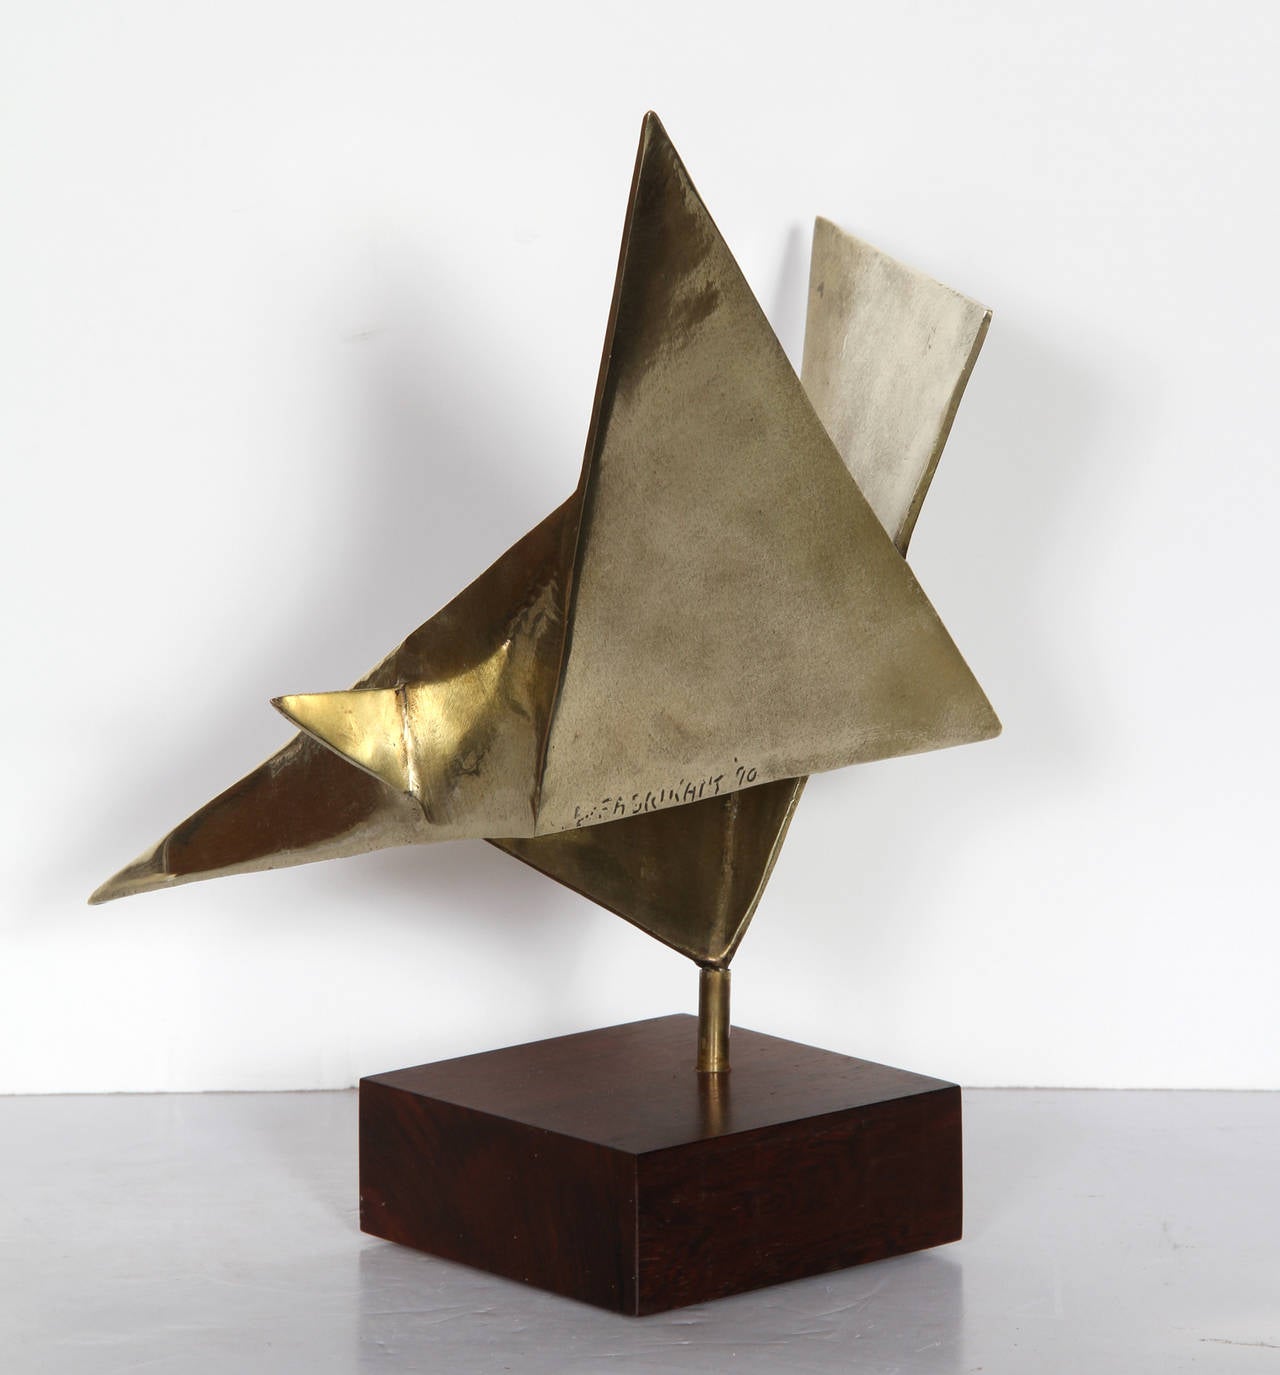 Geometric Abstract, Bronze Sculpture by Elayne Fabrikant 1